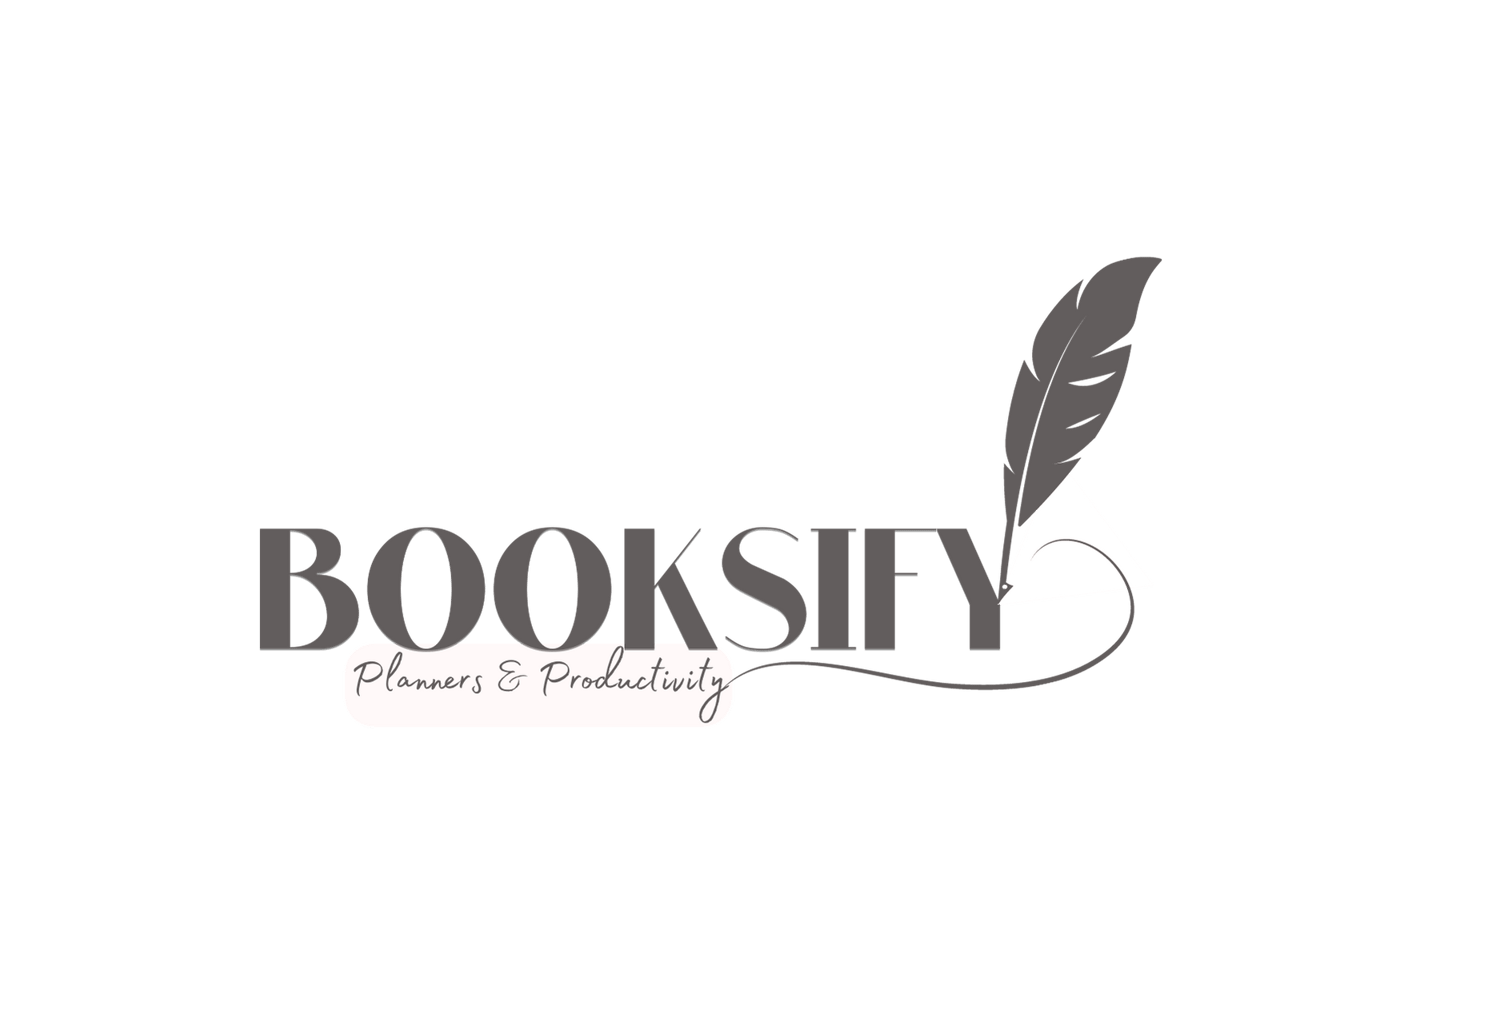 Booksify - Planners and Productivity Store Logo